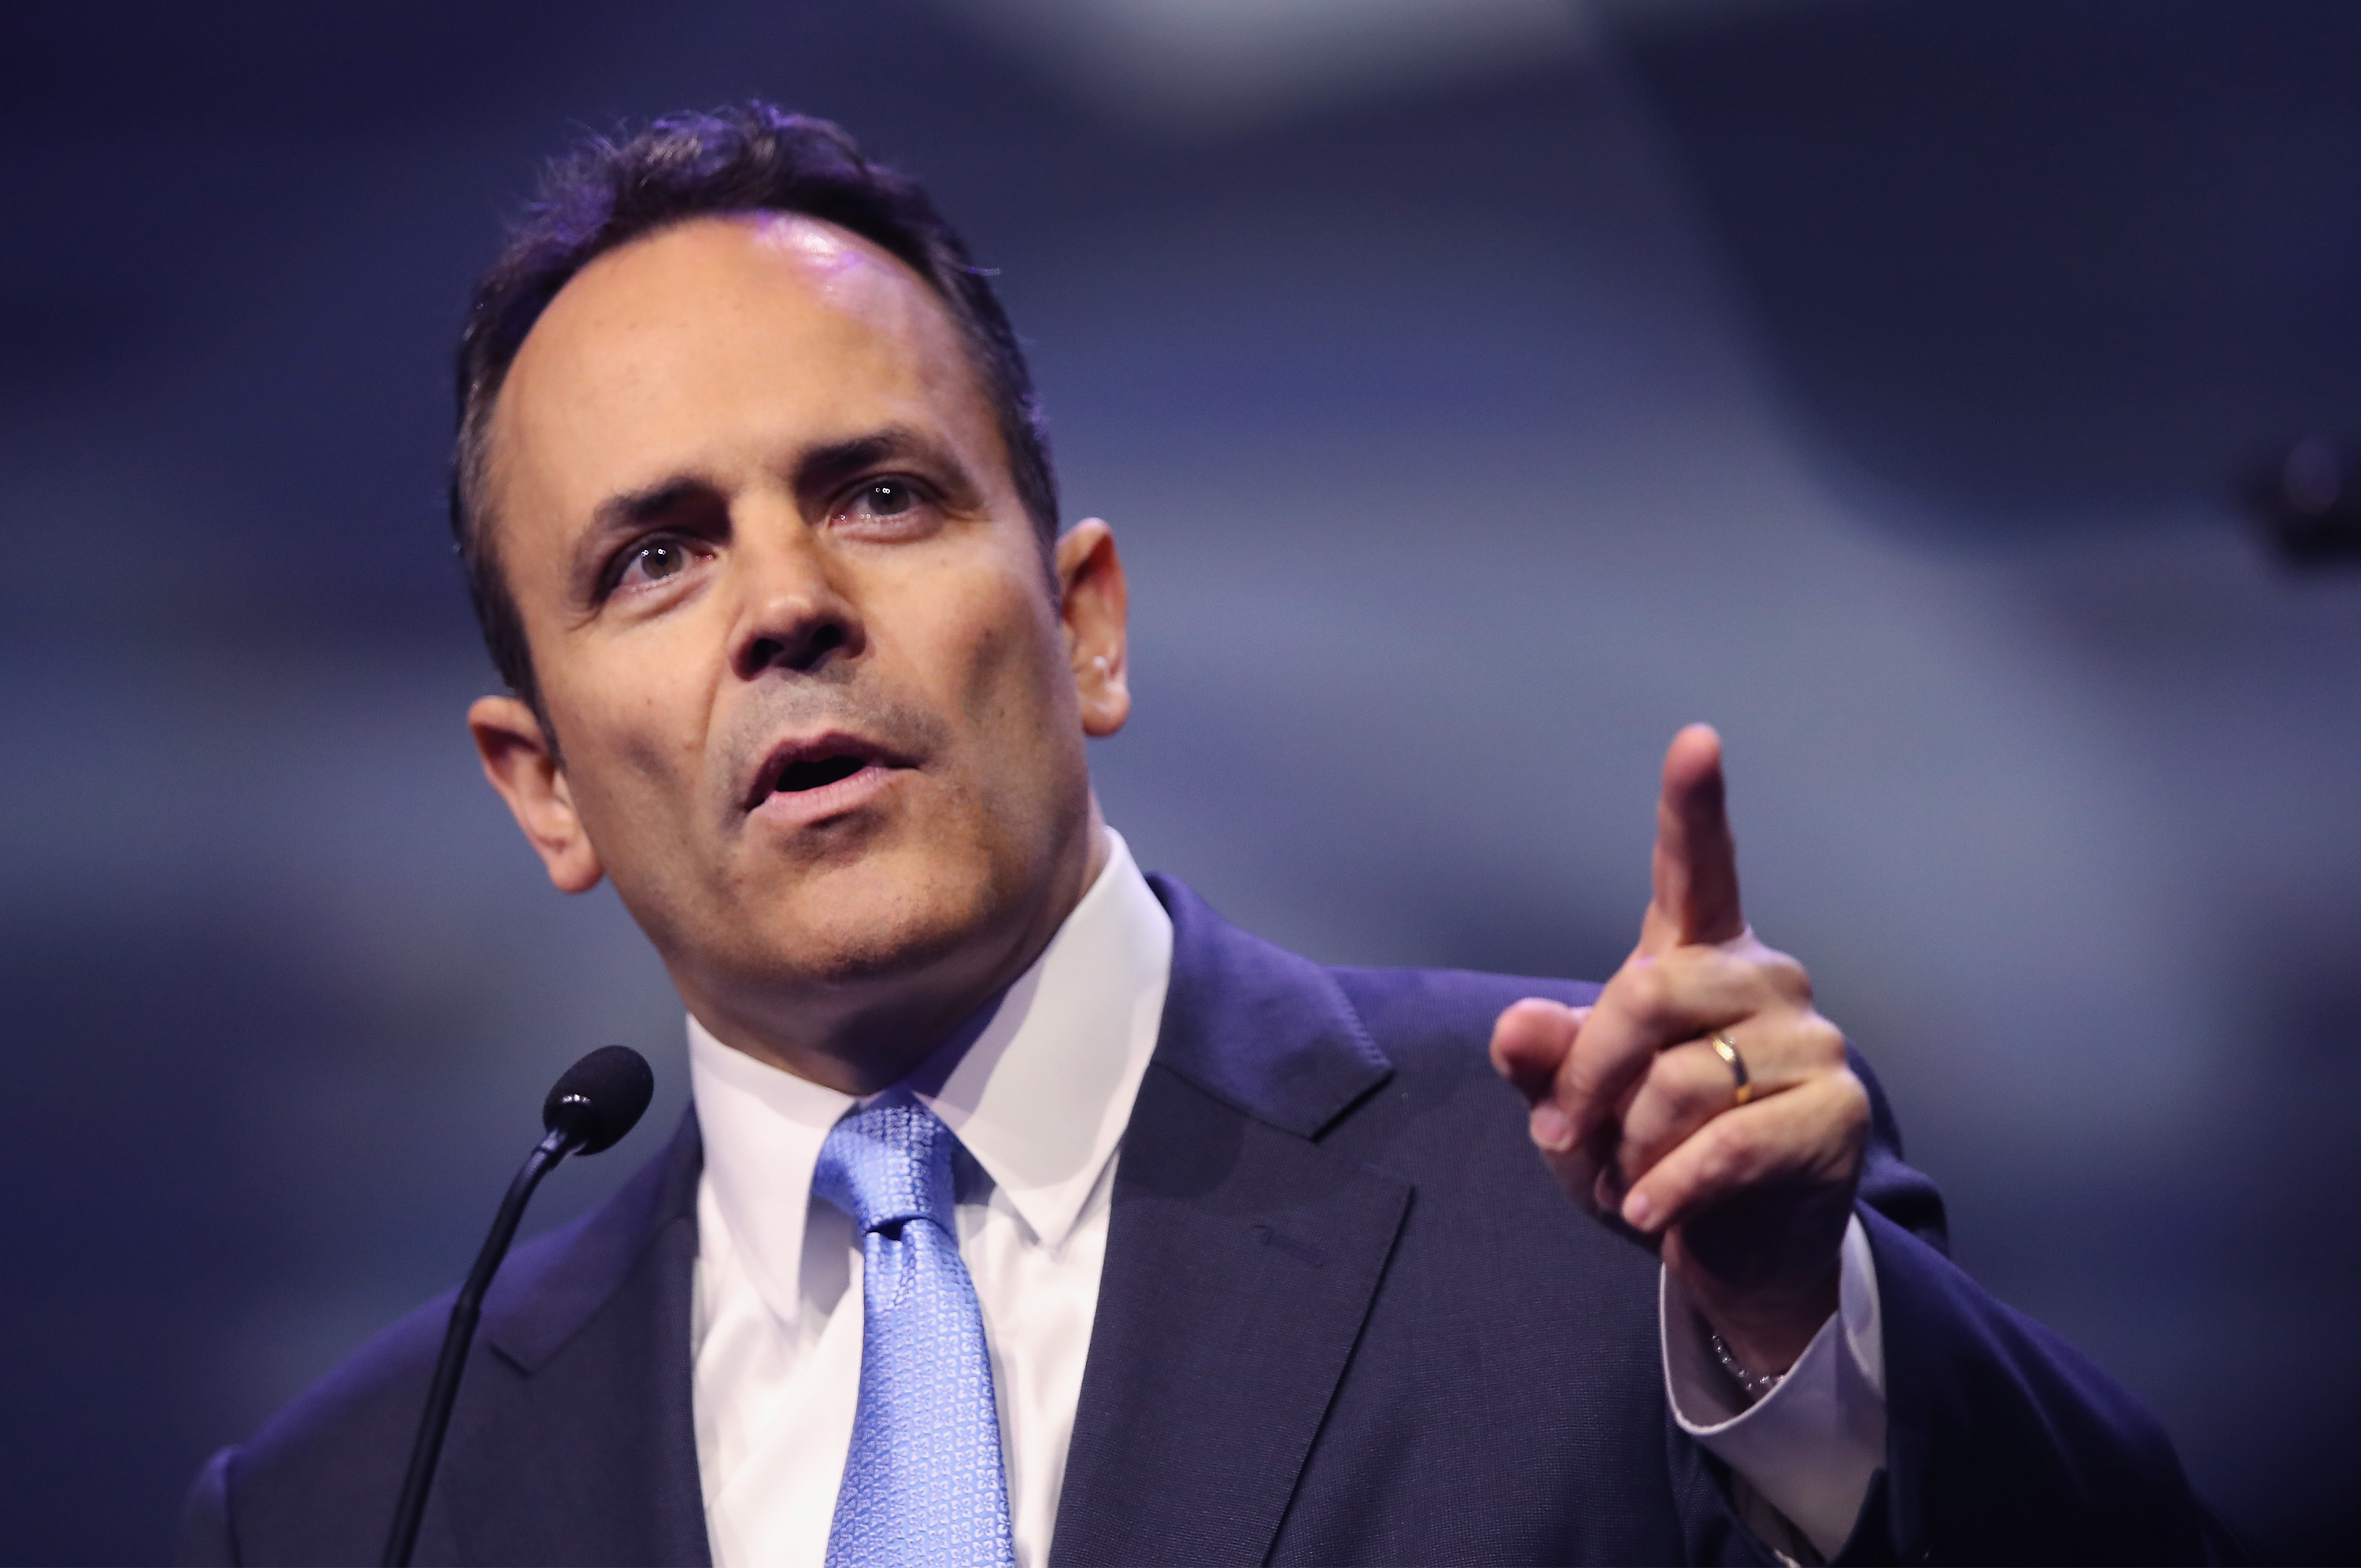 LOUISVILLE, KY - MAY 20:  Gov. Matt Bevin (R-Ky.) speaks at the National Rifle Association's NRA-ILA Leadership Forum during the NRA Convention at the Kentucky Exposition Center on May 20, 2016 in Louisville, Kentucky. The convention, which opened today, runs until May 22.  (Photo by Scott Olson/Getty Images) (Scott Olson—Getty Images)